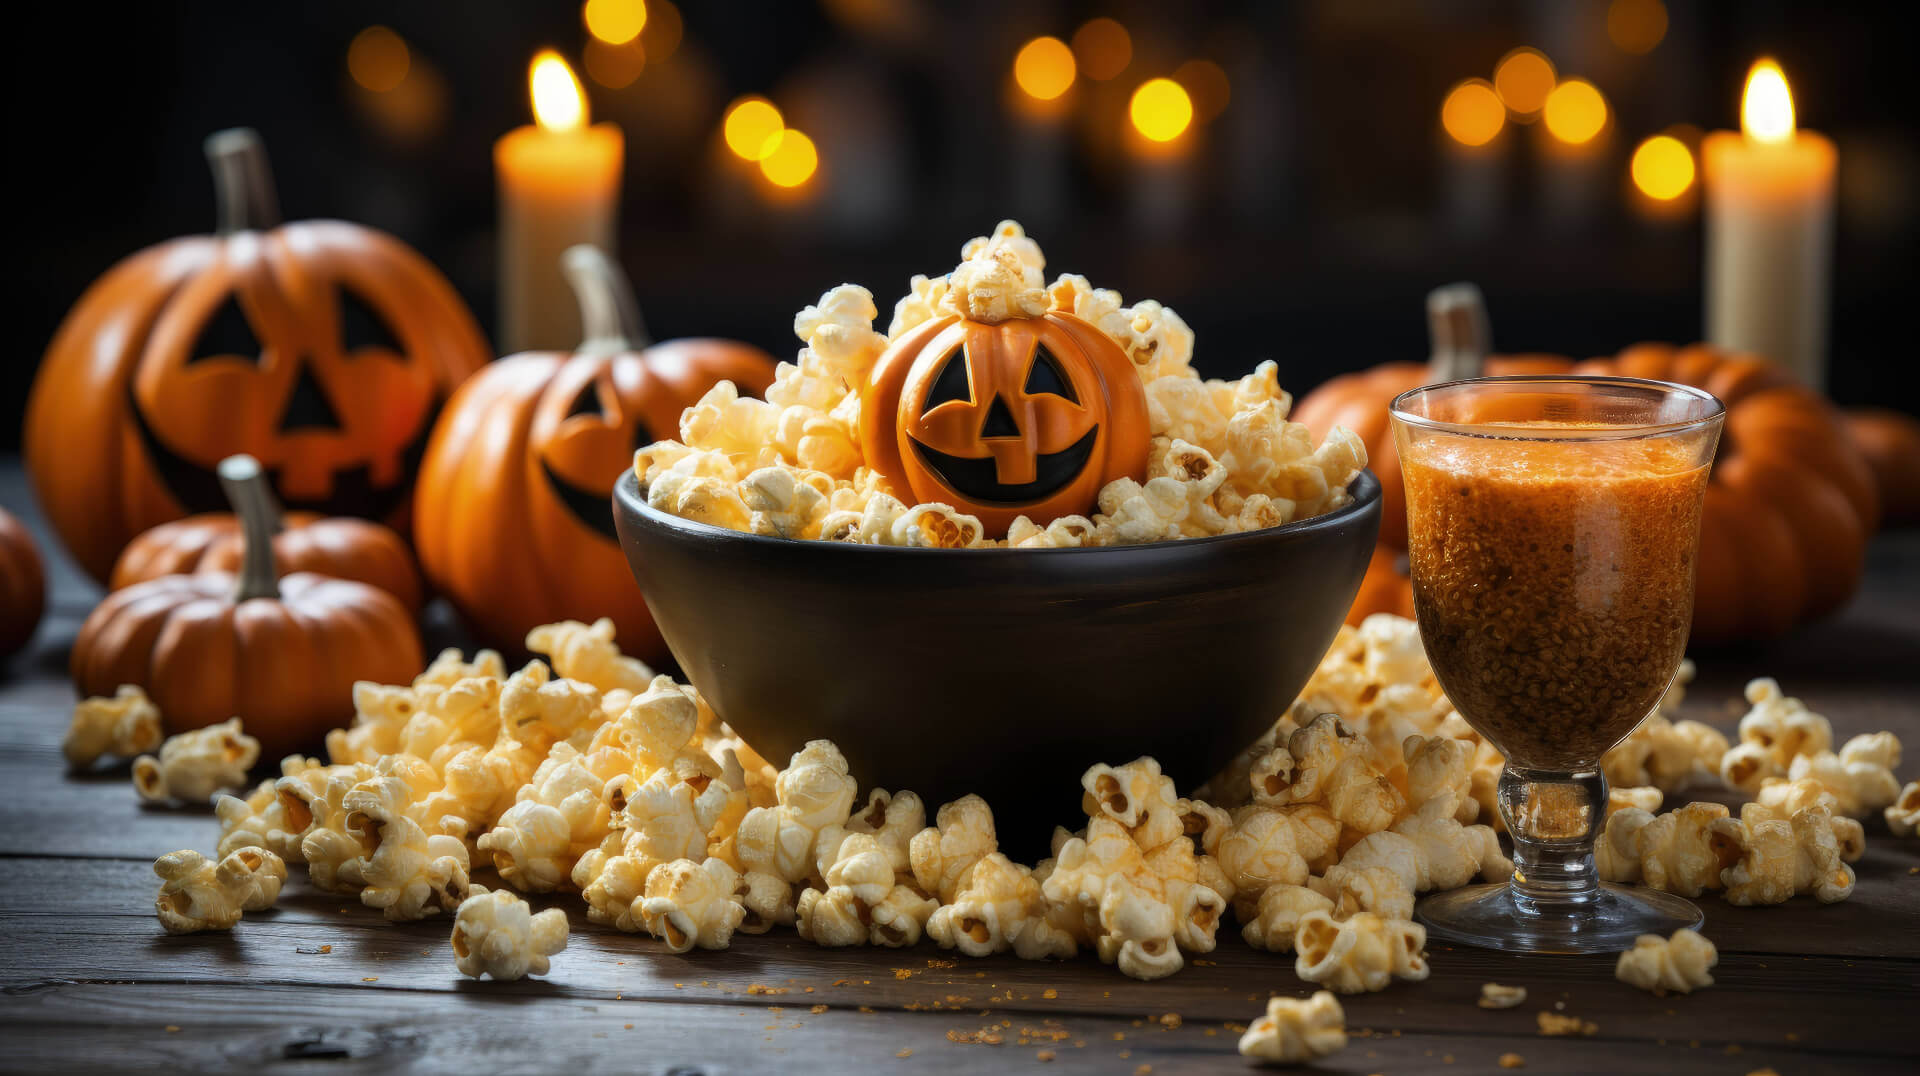 Discover the Best Halloween Movies! Whether with family or friends, there's something for everyone. Experience the perfect spooky fun!